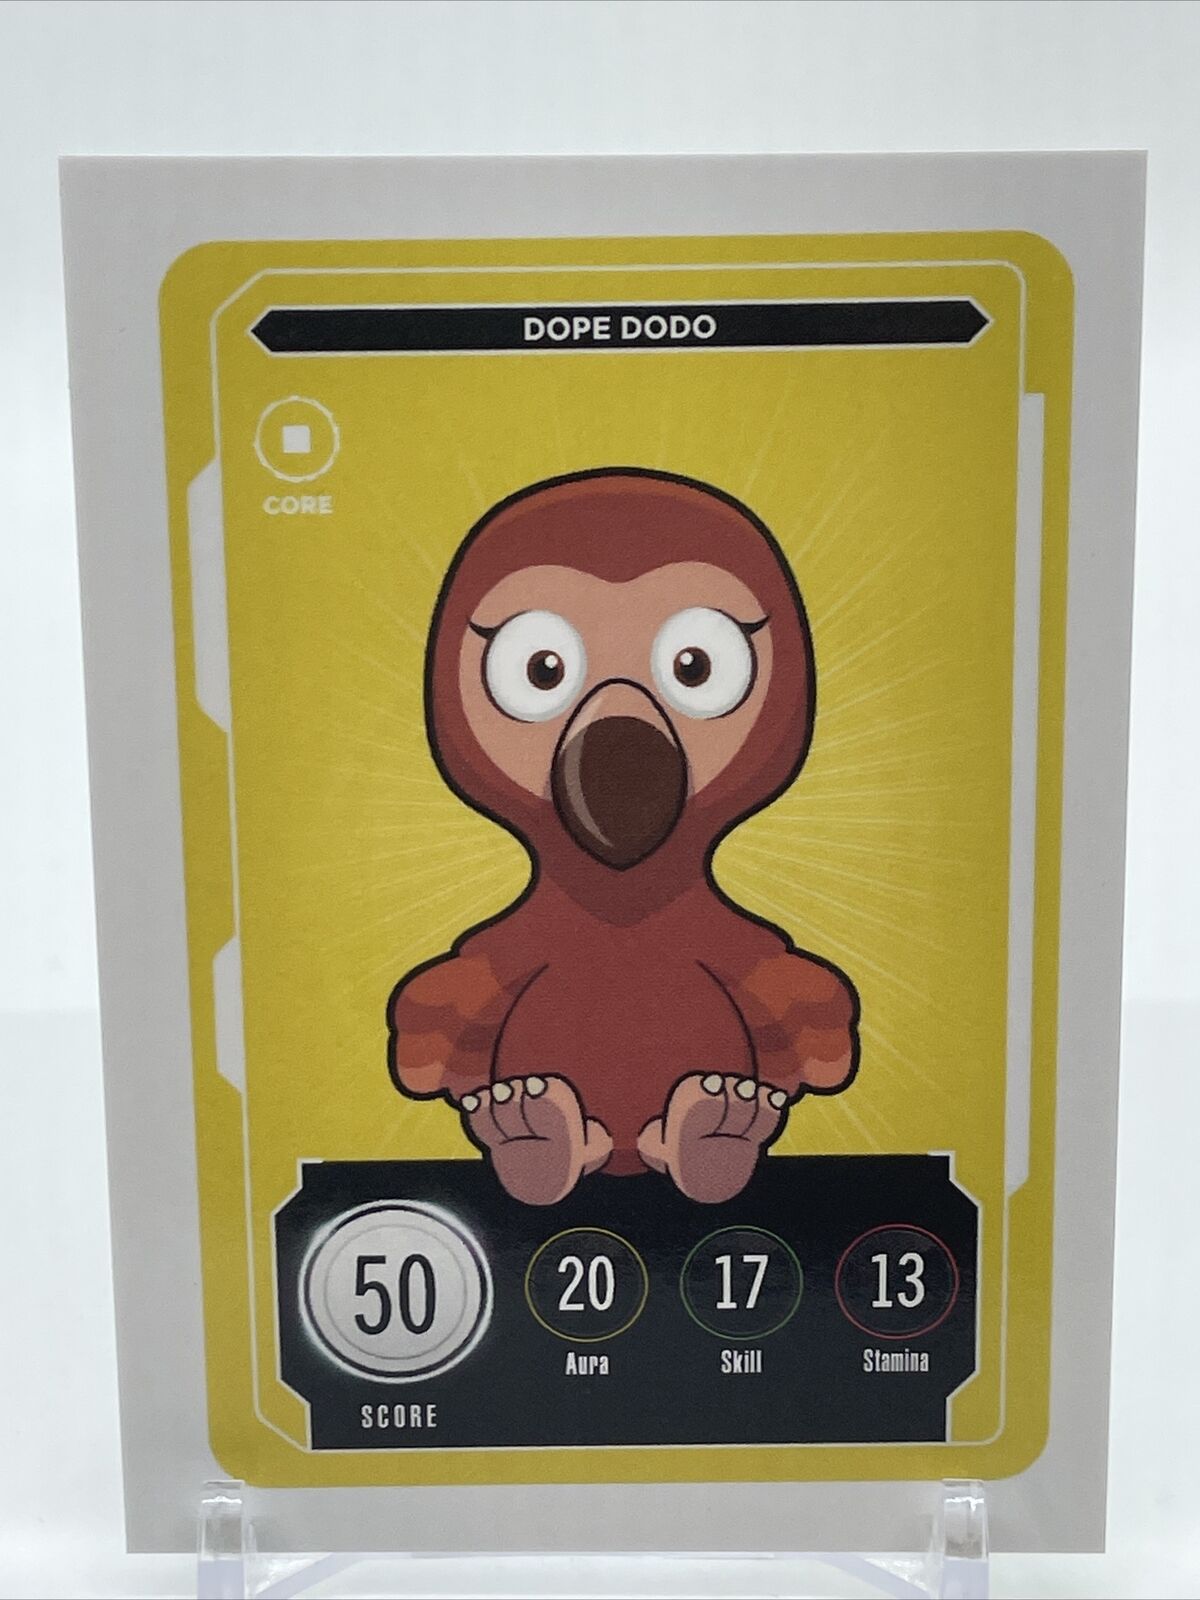 Dope Dodo Veefriends Compete And Collect Series 2 Trading Card Gary Vee